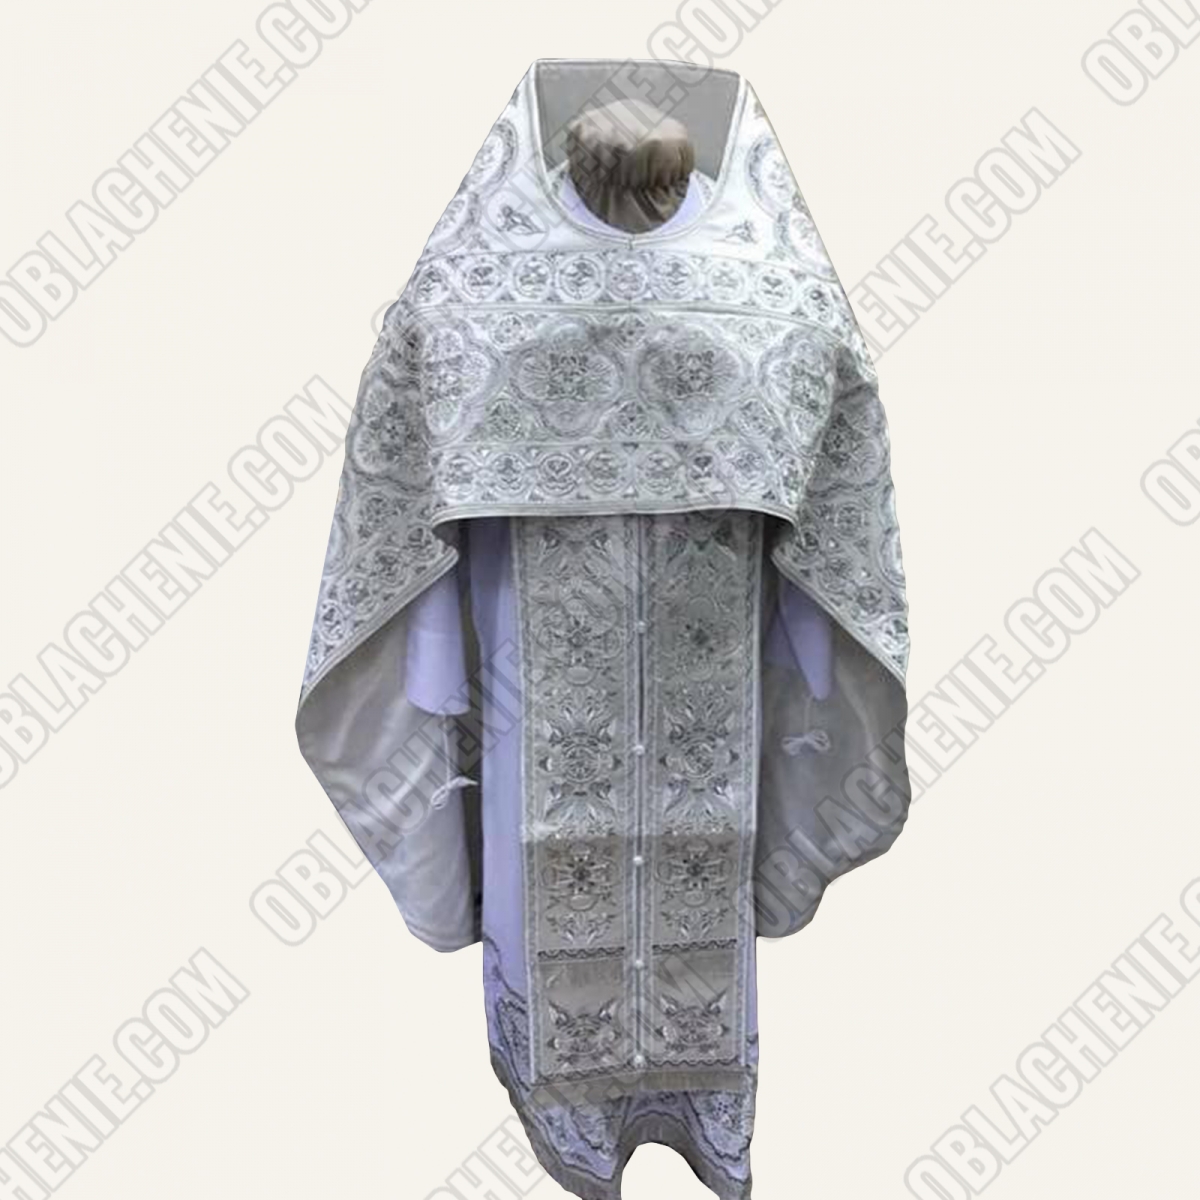 EMBROIDERED PRIEST'S VESTMENTS 12035